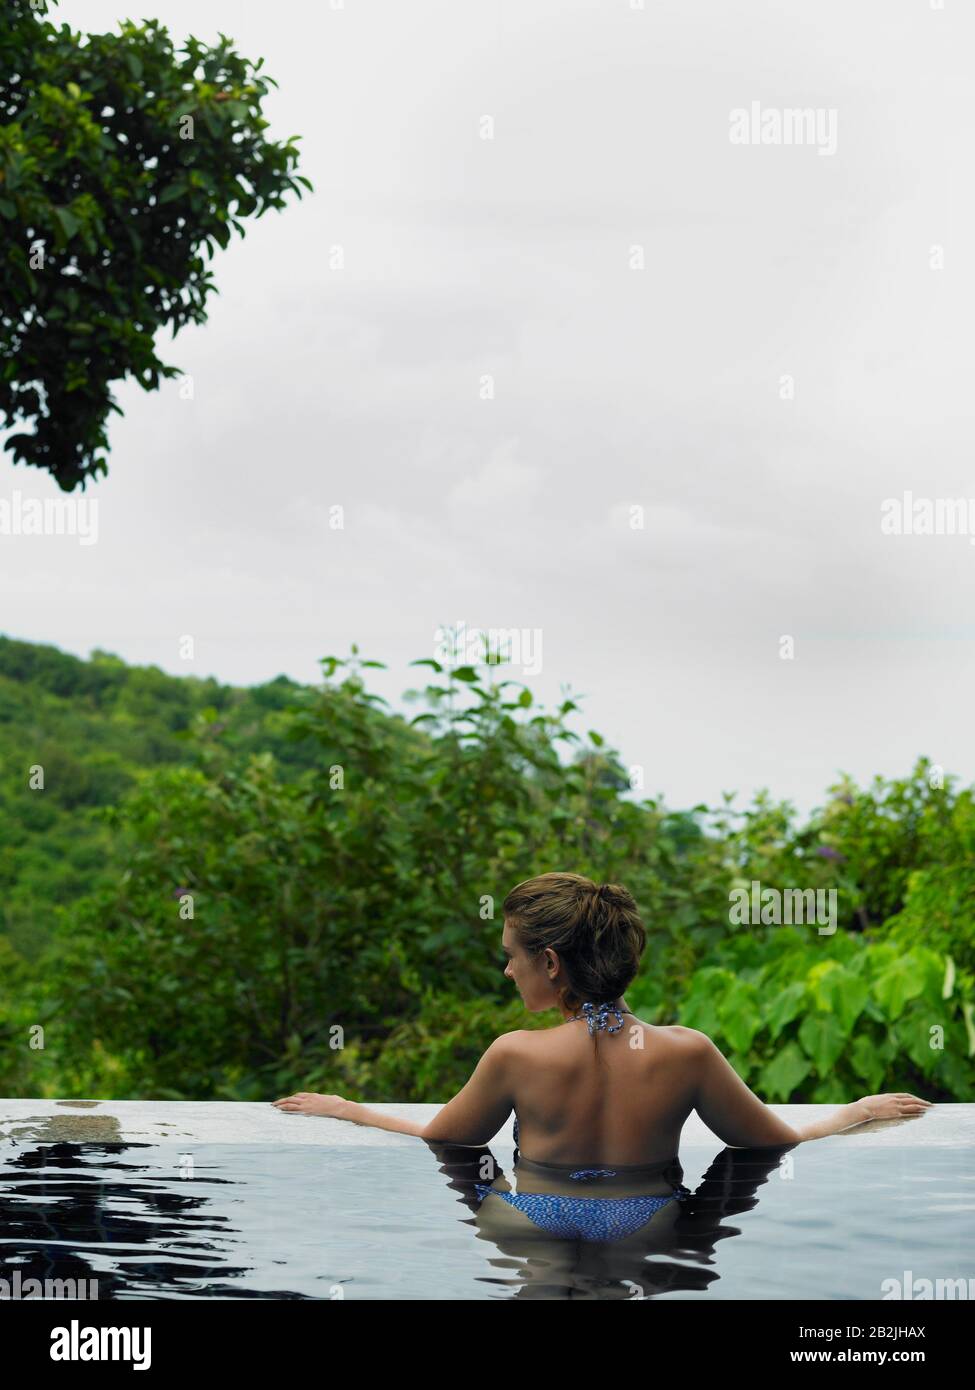 Woman Wading in an Infinity Pool Stock Photo